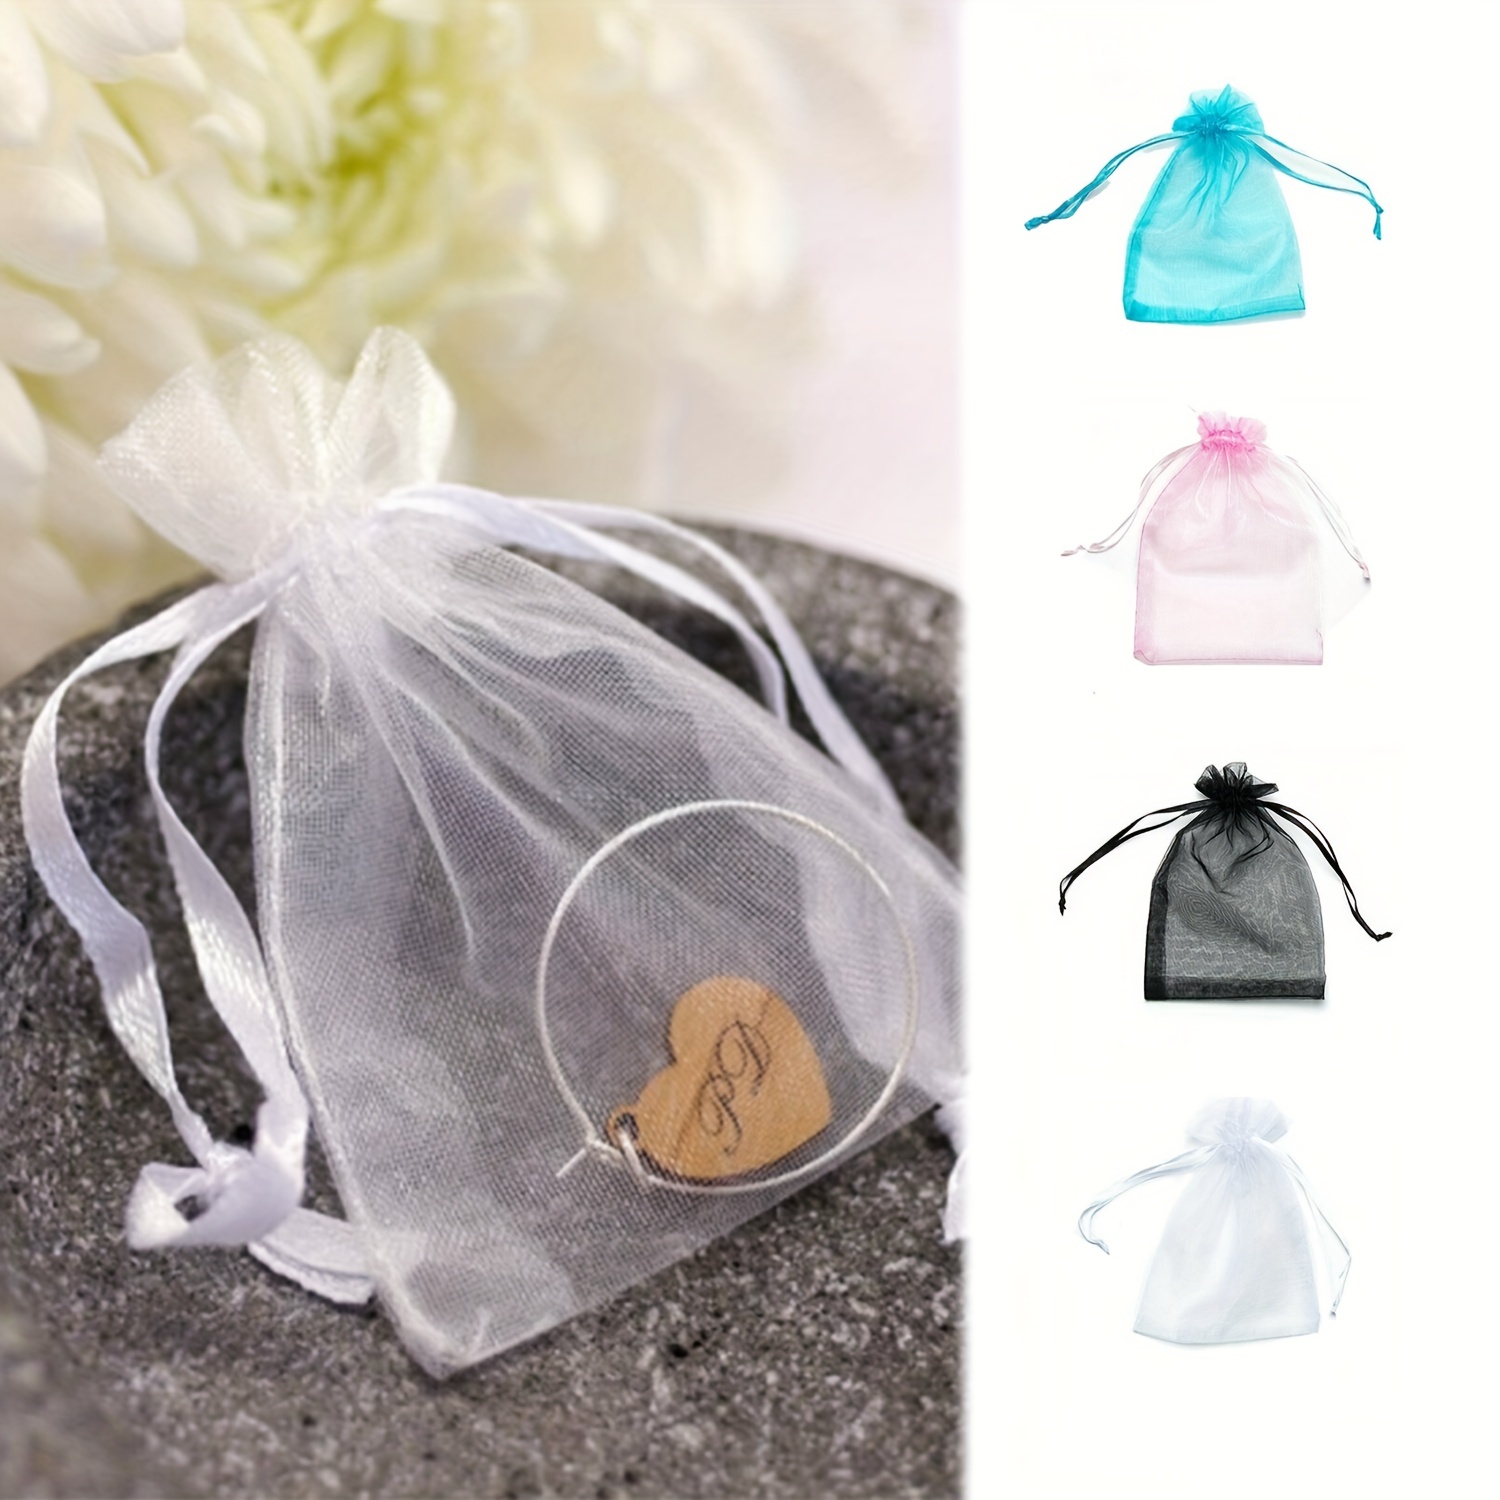 100pcs White Organza Jewelry Bags Drawstring 3 x 4 inch, Little Mesh Gift Pouches Mini Candy Organza Bags for Small Presents Jewelry Earrings Candy